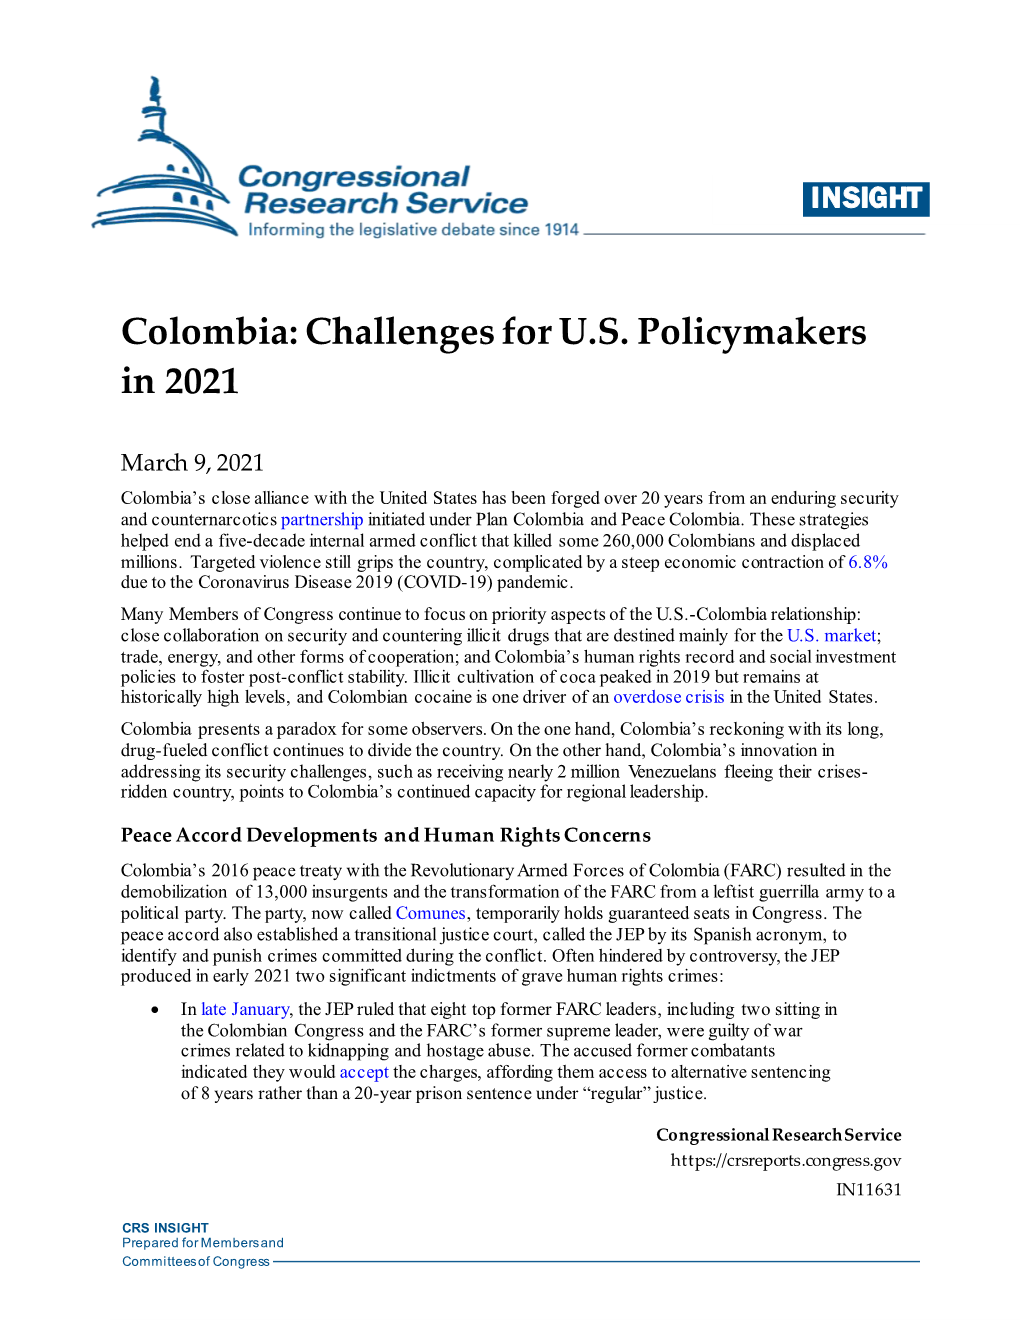 Colombia: Challenges for U.S. Policymakers in 2021